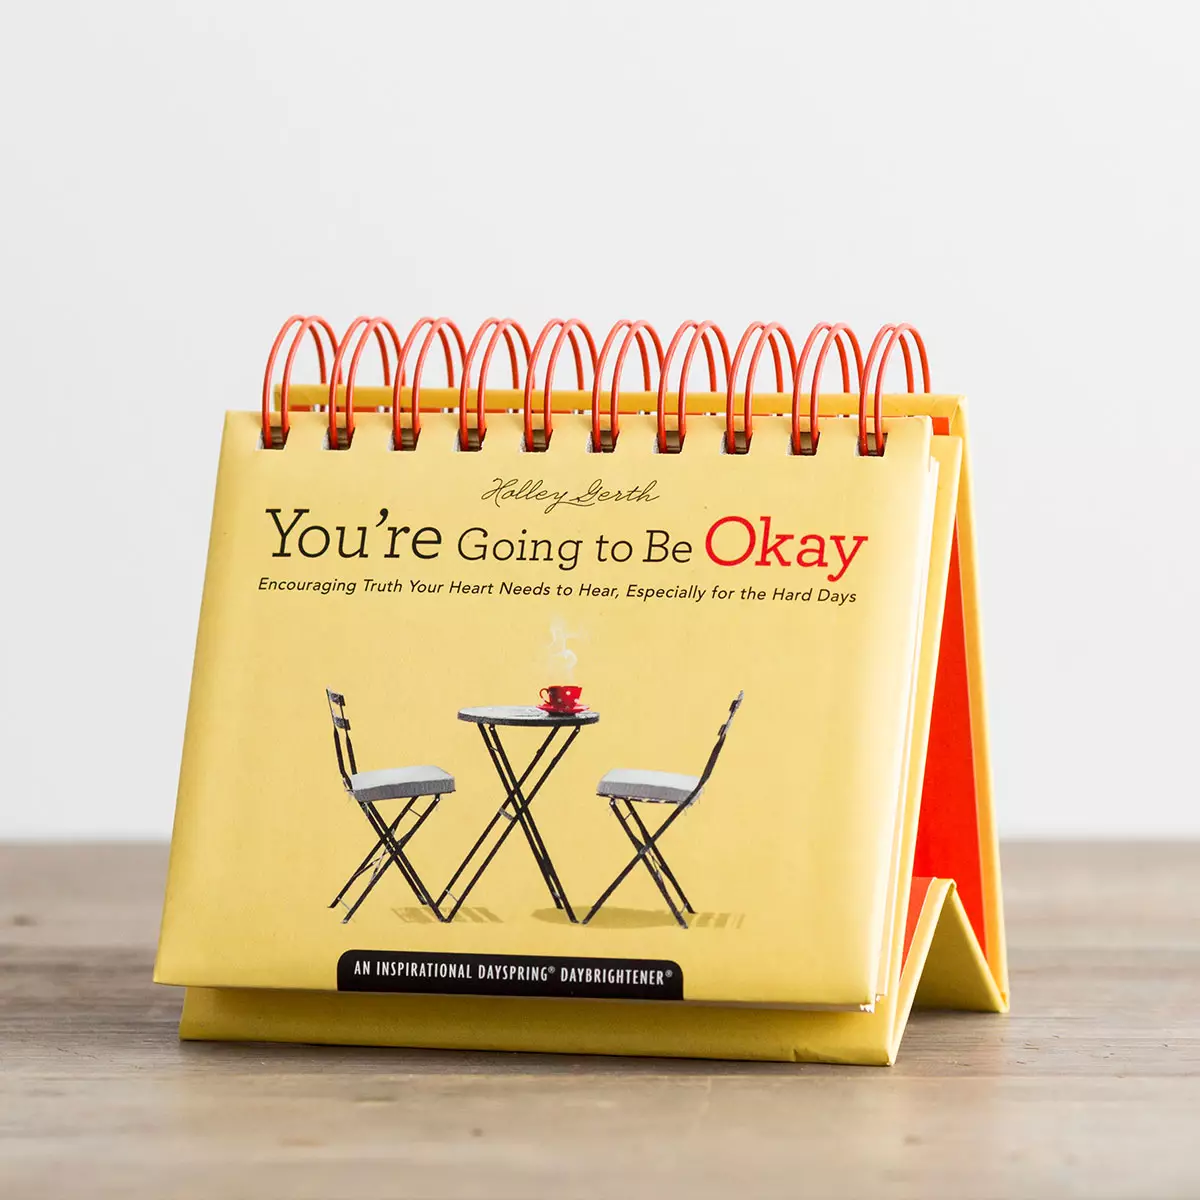 Holley Gerth - You're Going To Be Okay - 365 Day Perpetual Calendar